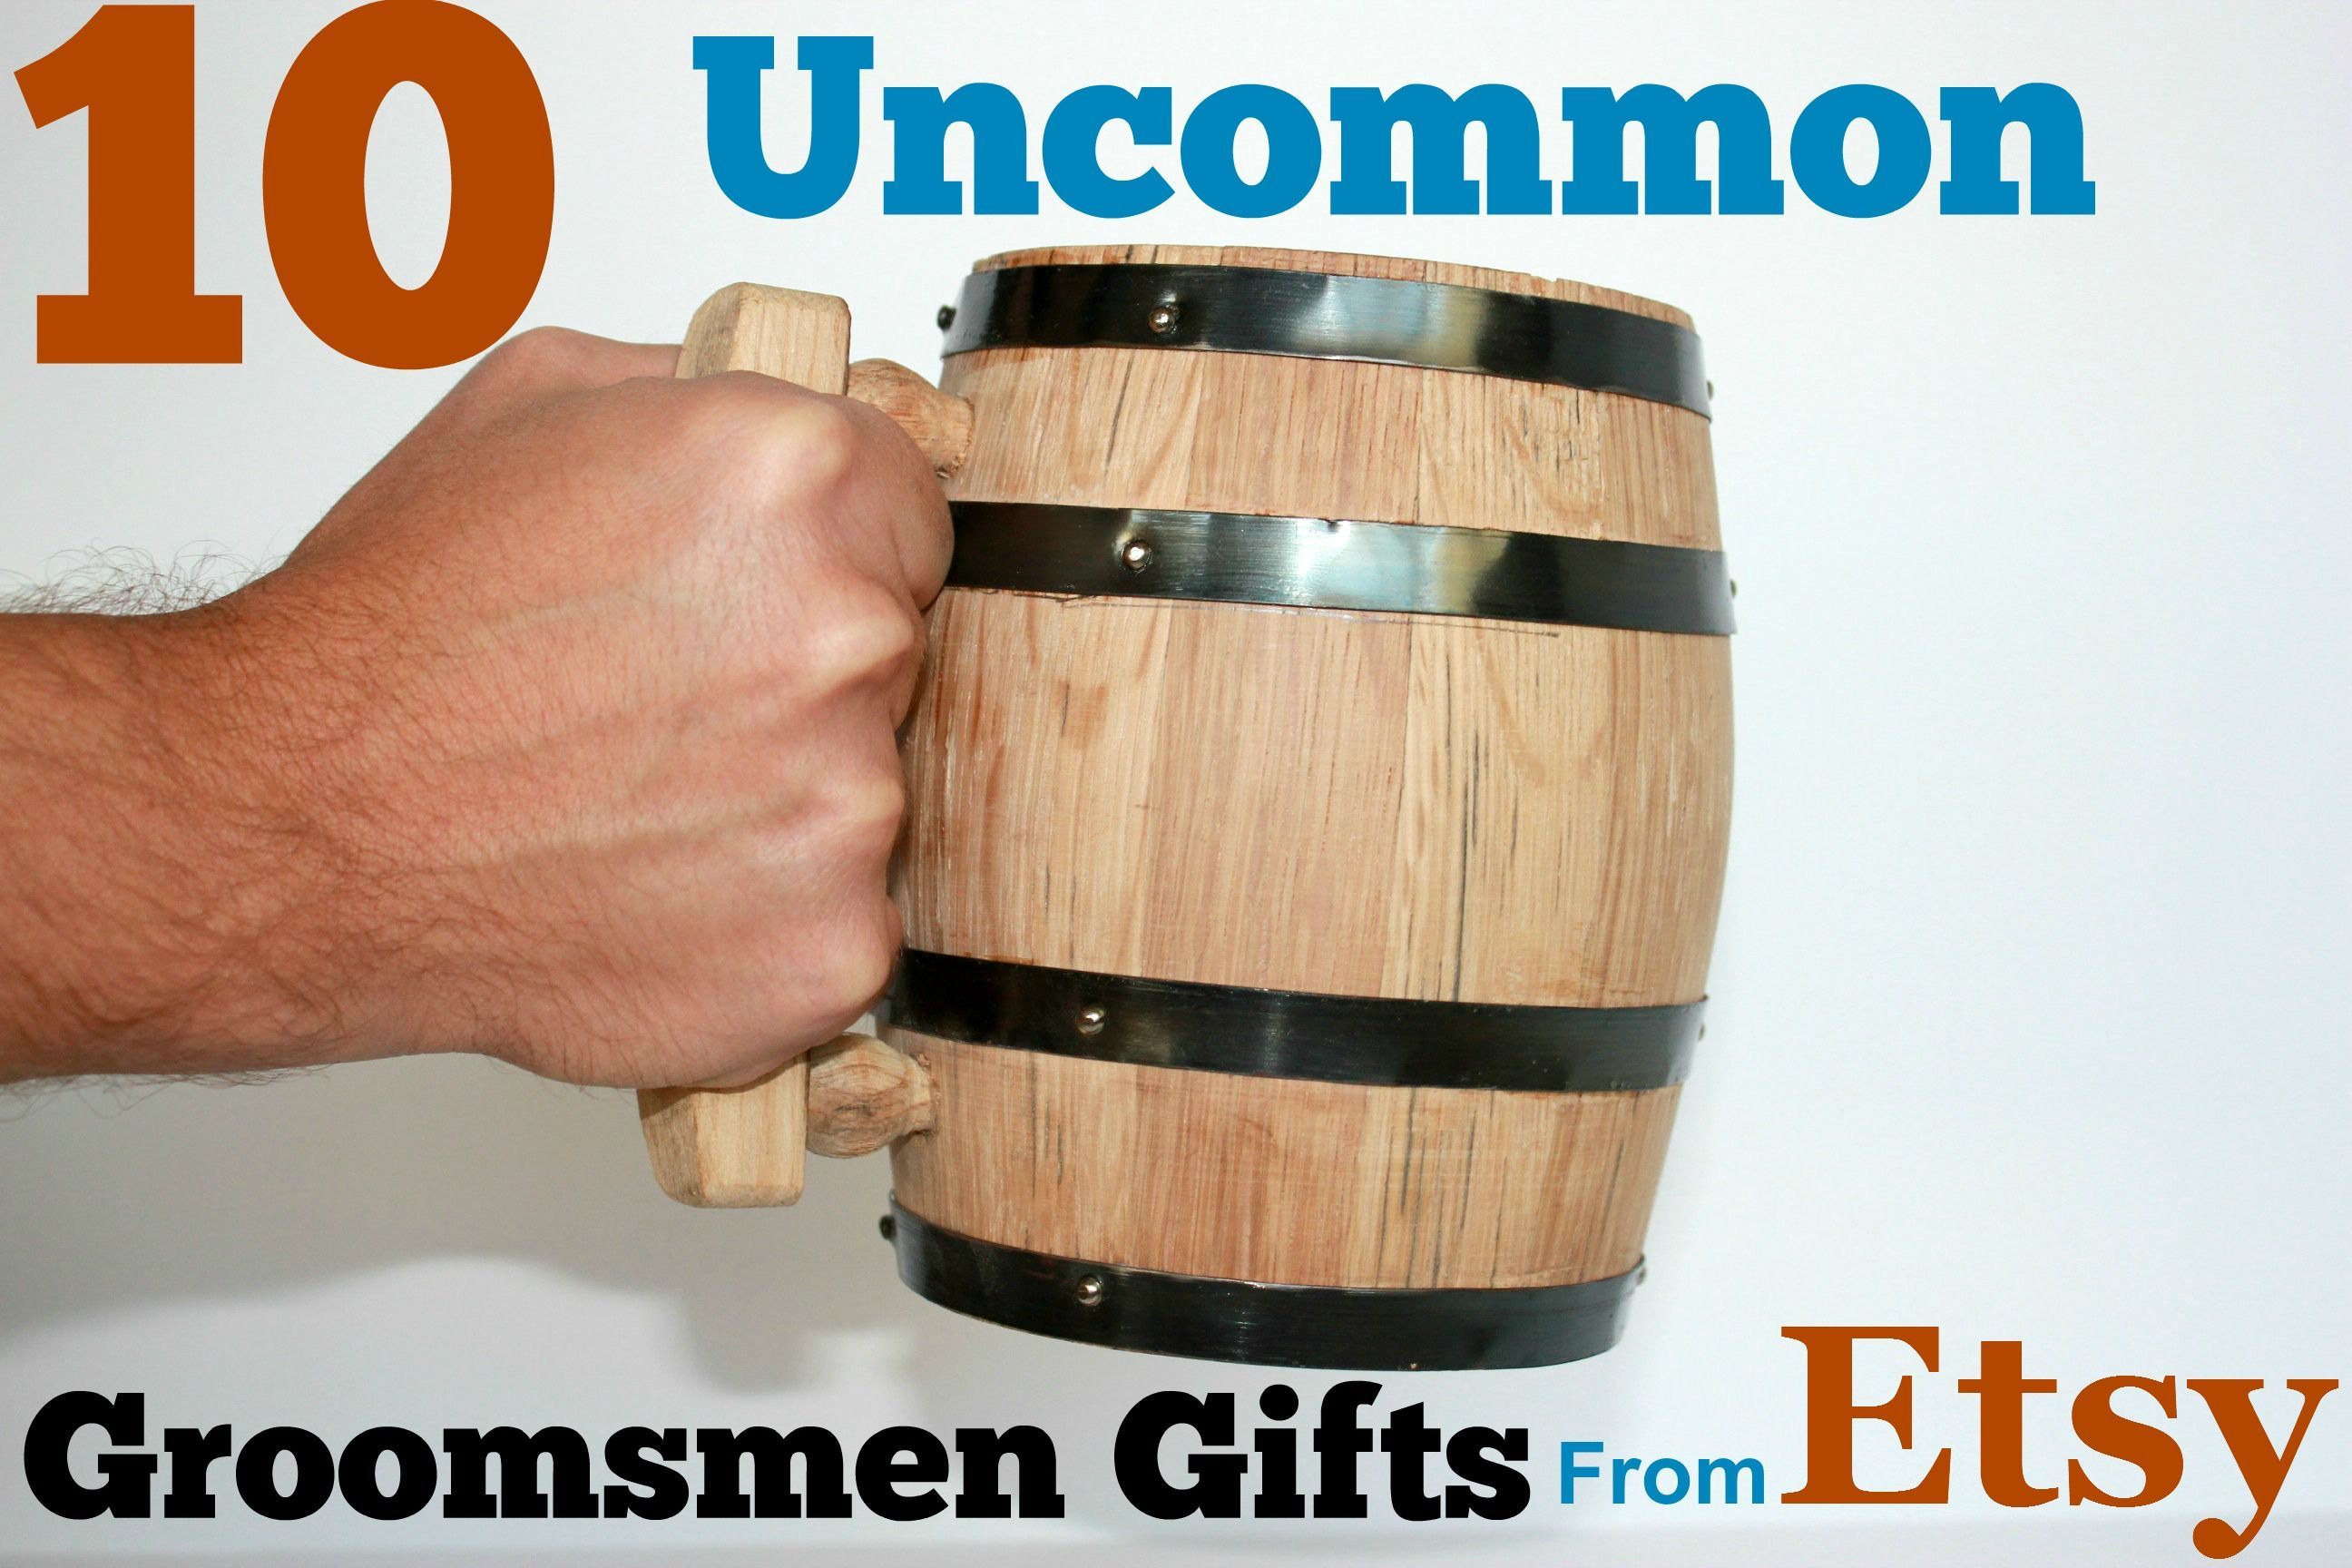 Uncommon groomsmen gifts found on Etsy — 10 unique ideas that havent been overdone!